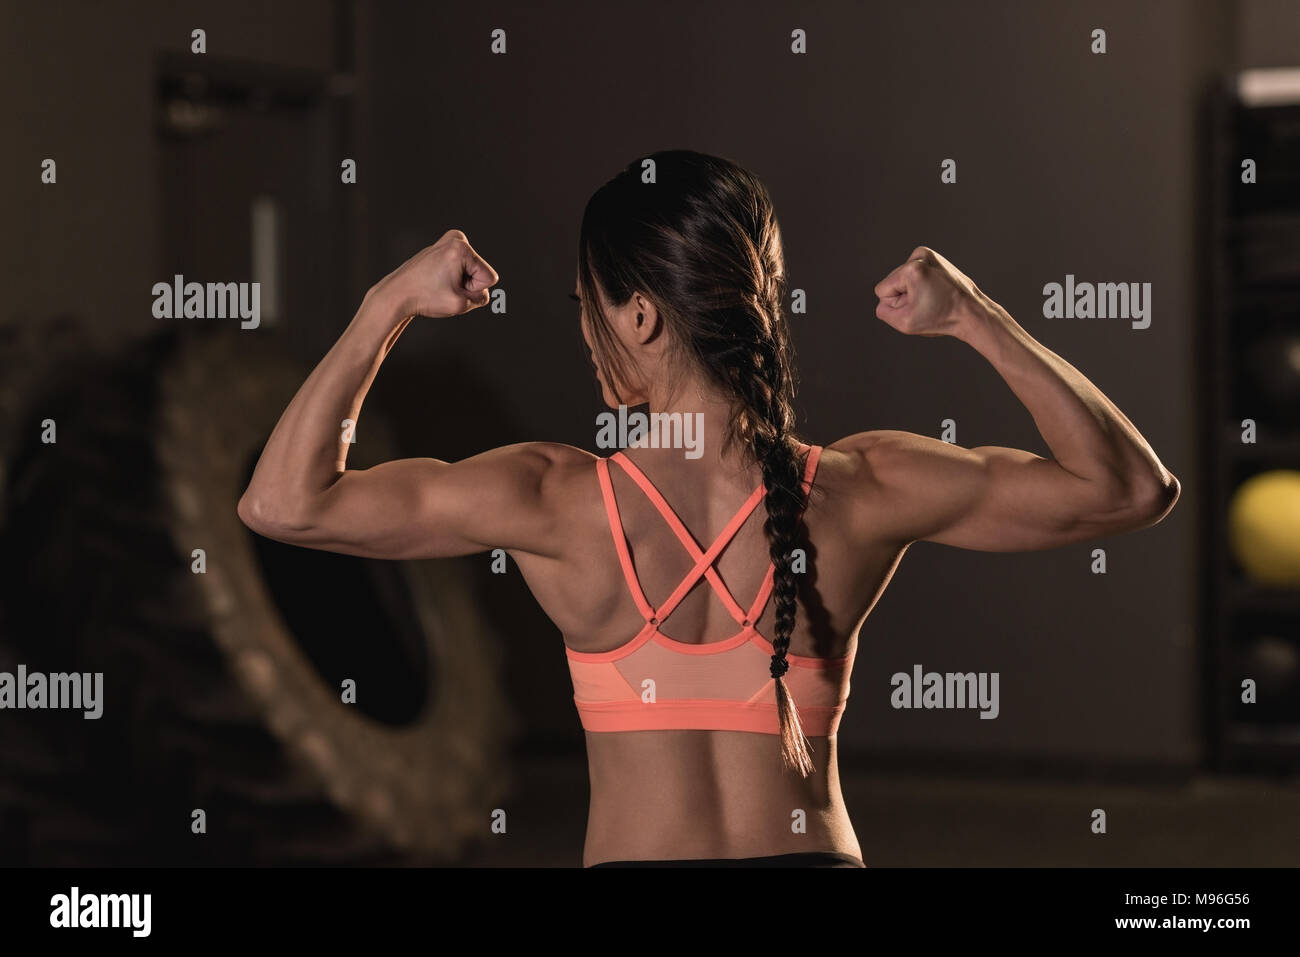 Rear view of fit woman flexing her muscles Stock Photo